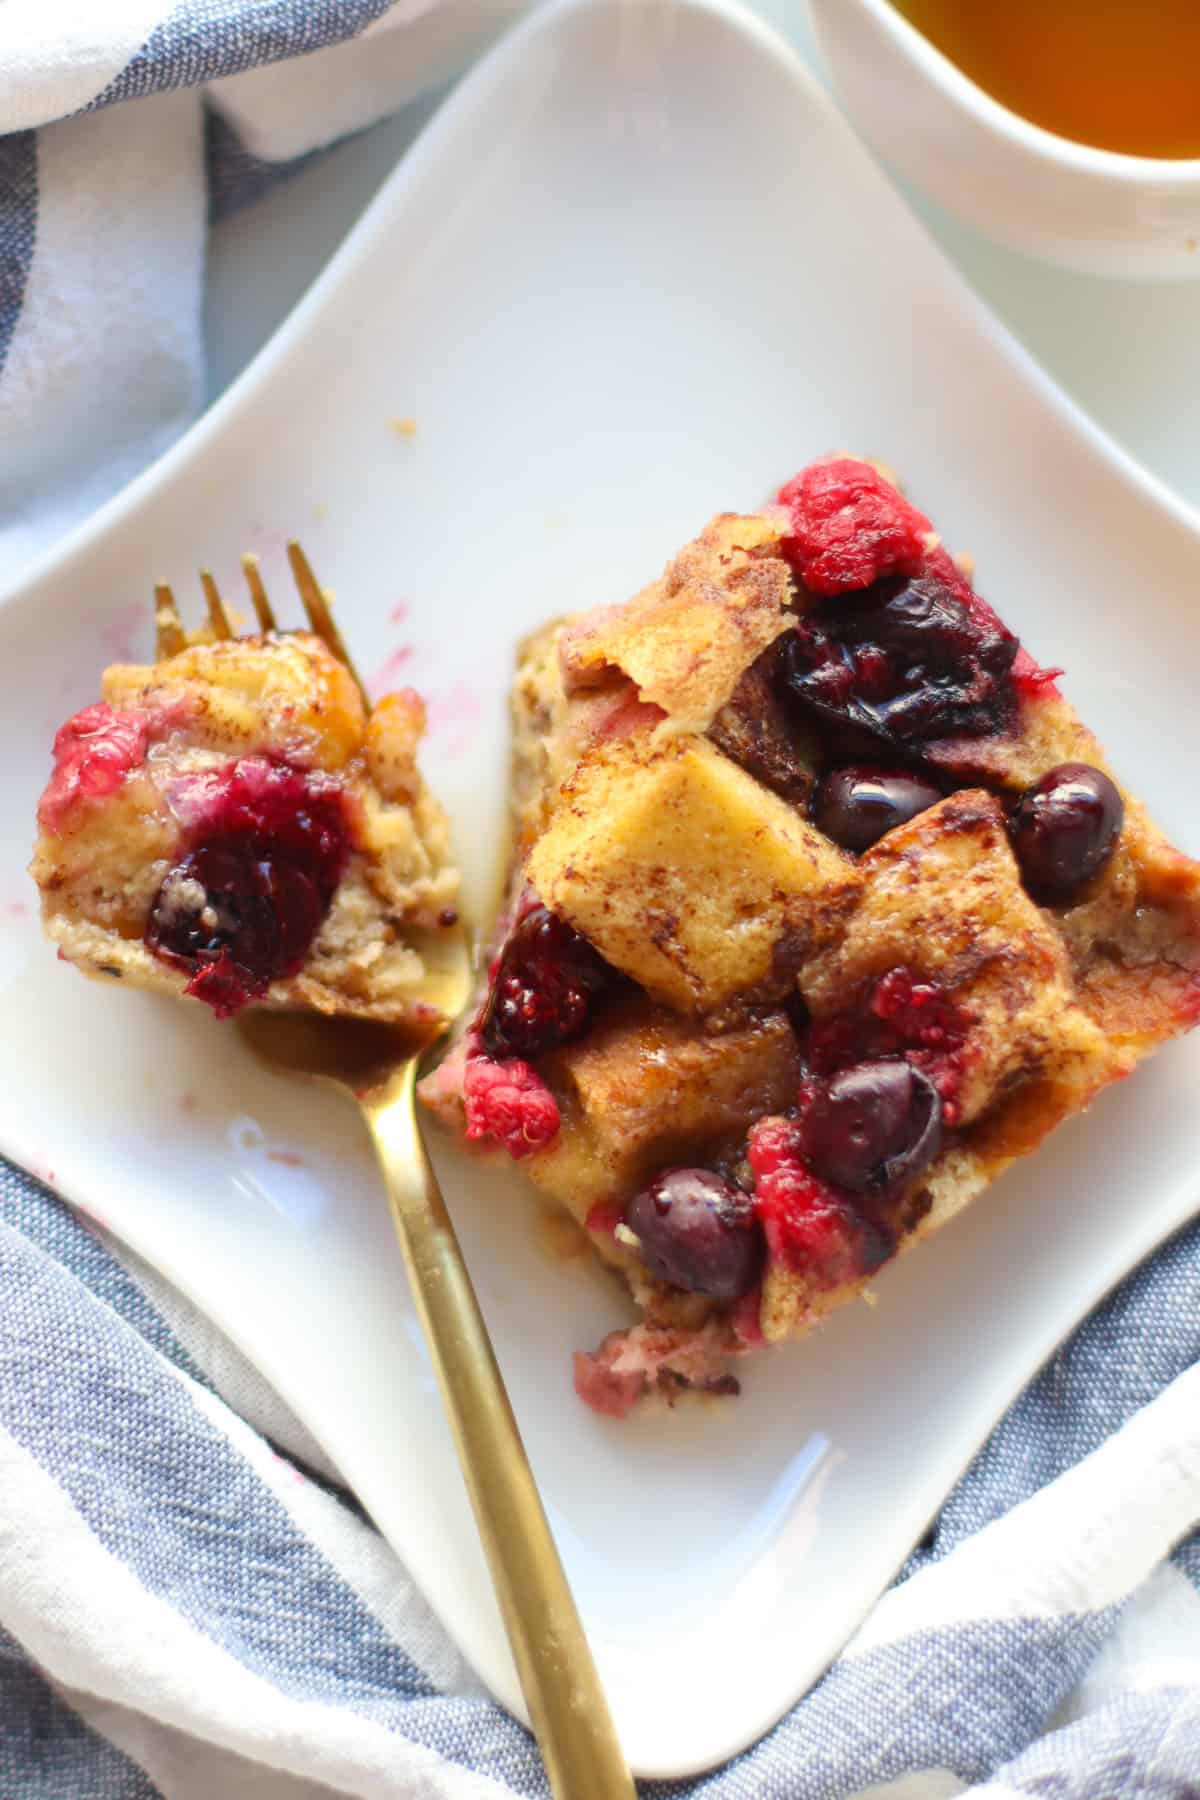 A slice of French toast casserole with a small piece on a fork.